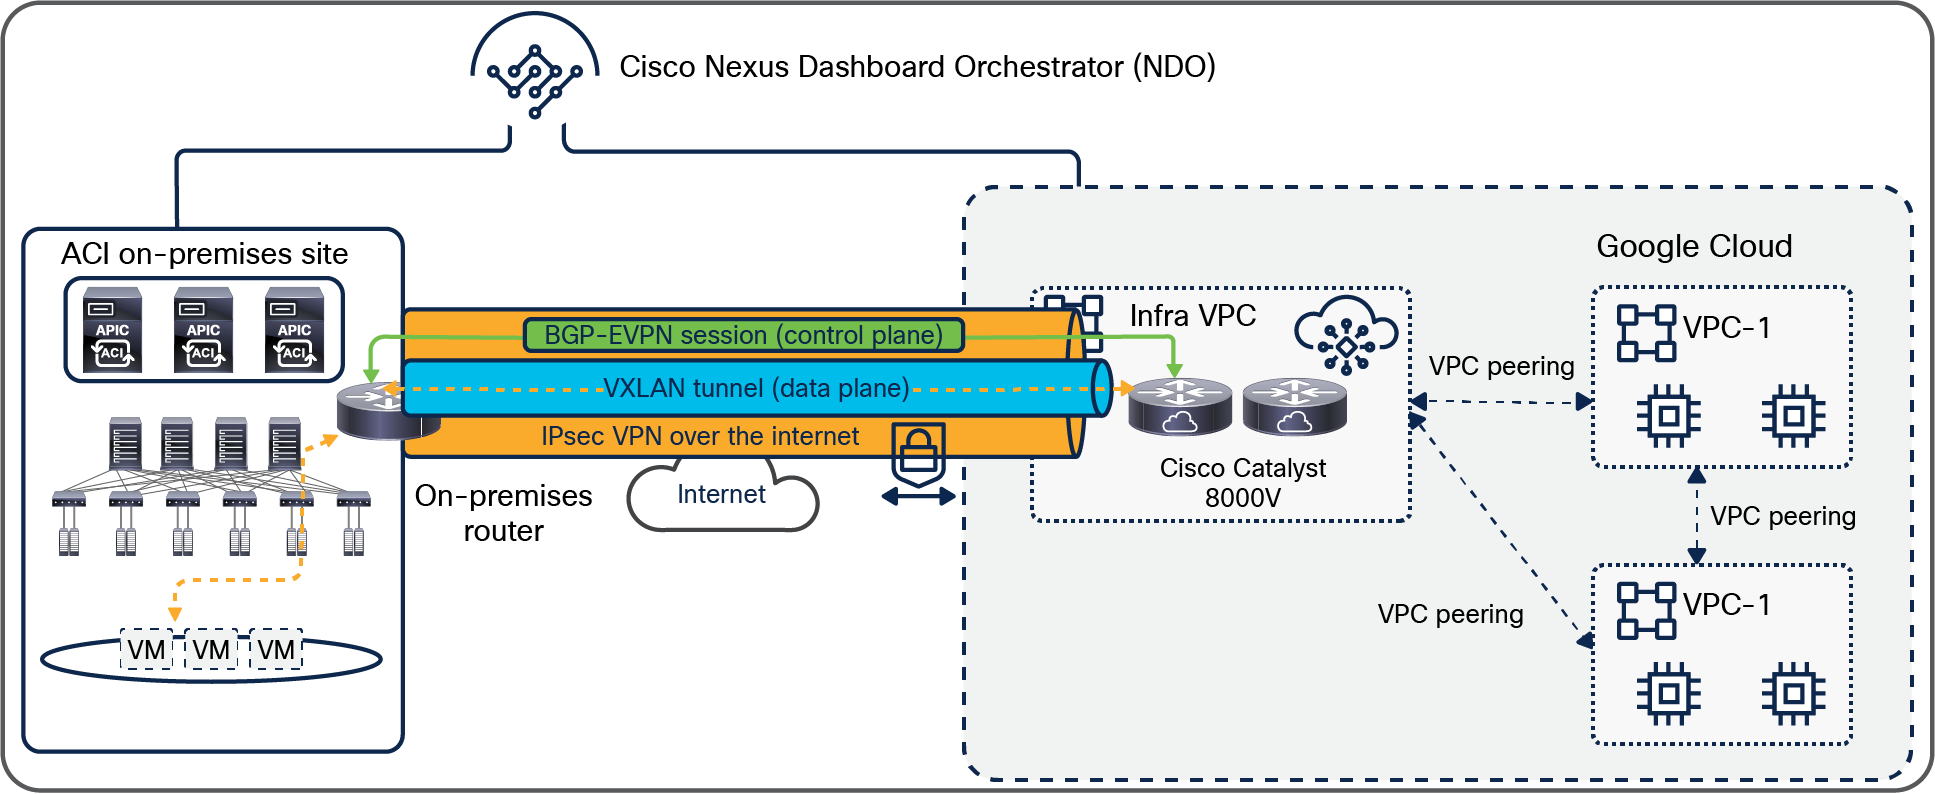 The overlay network between on-premises and cloud sites with Cisco Catalyst 8000V